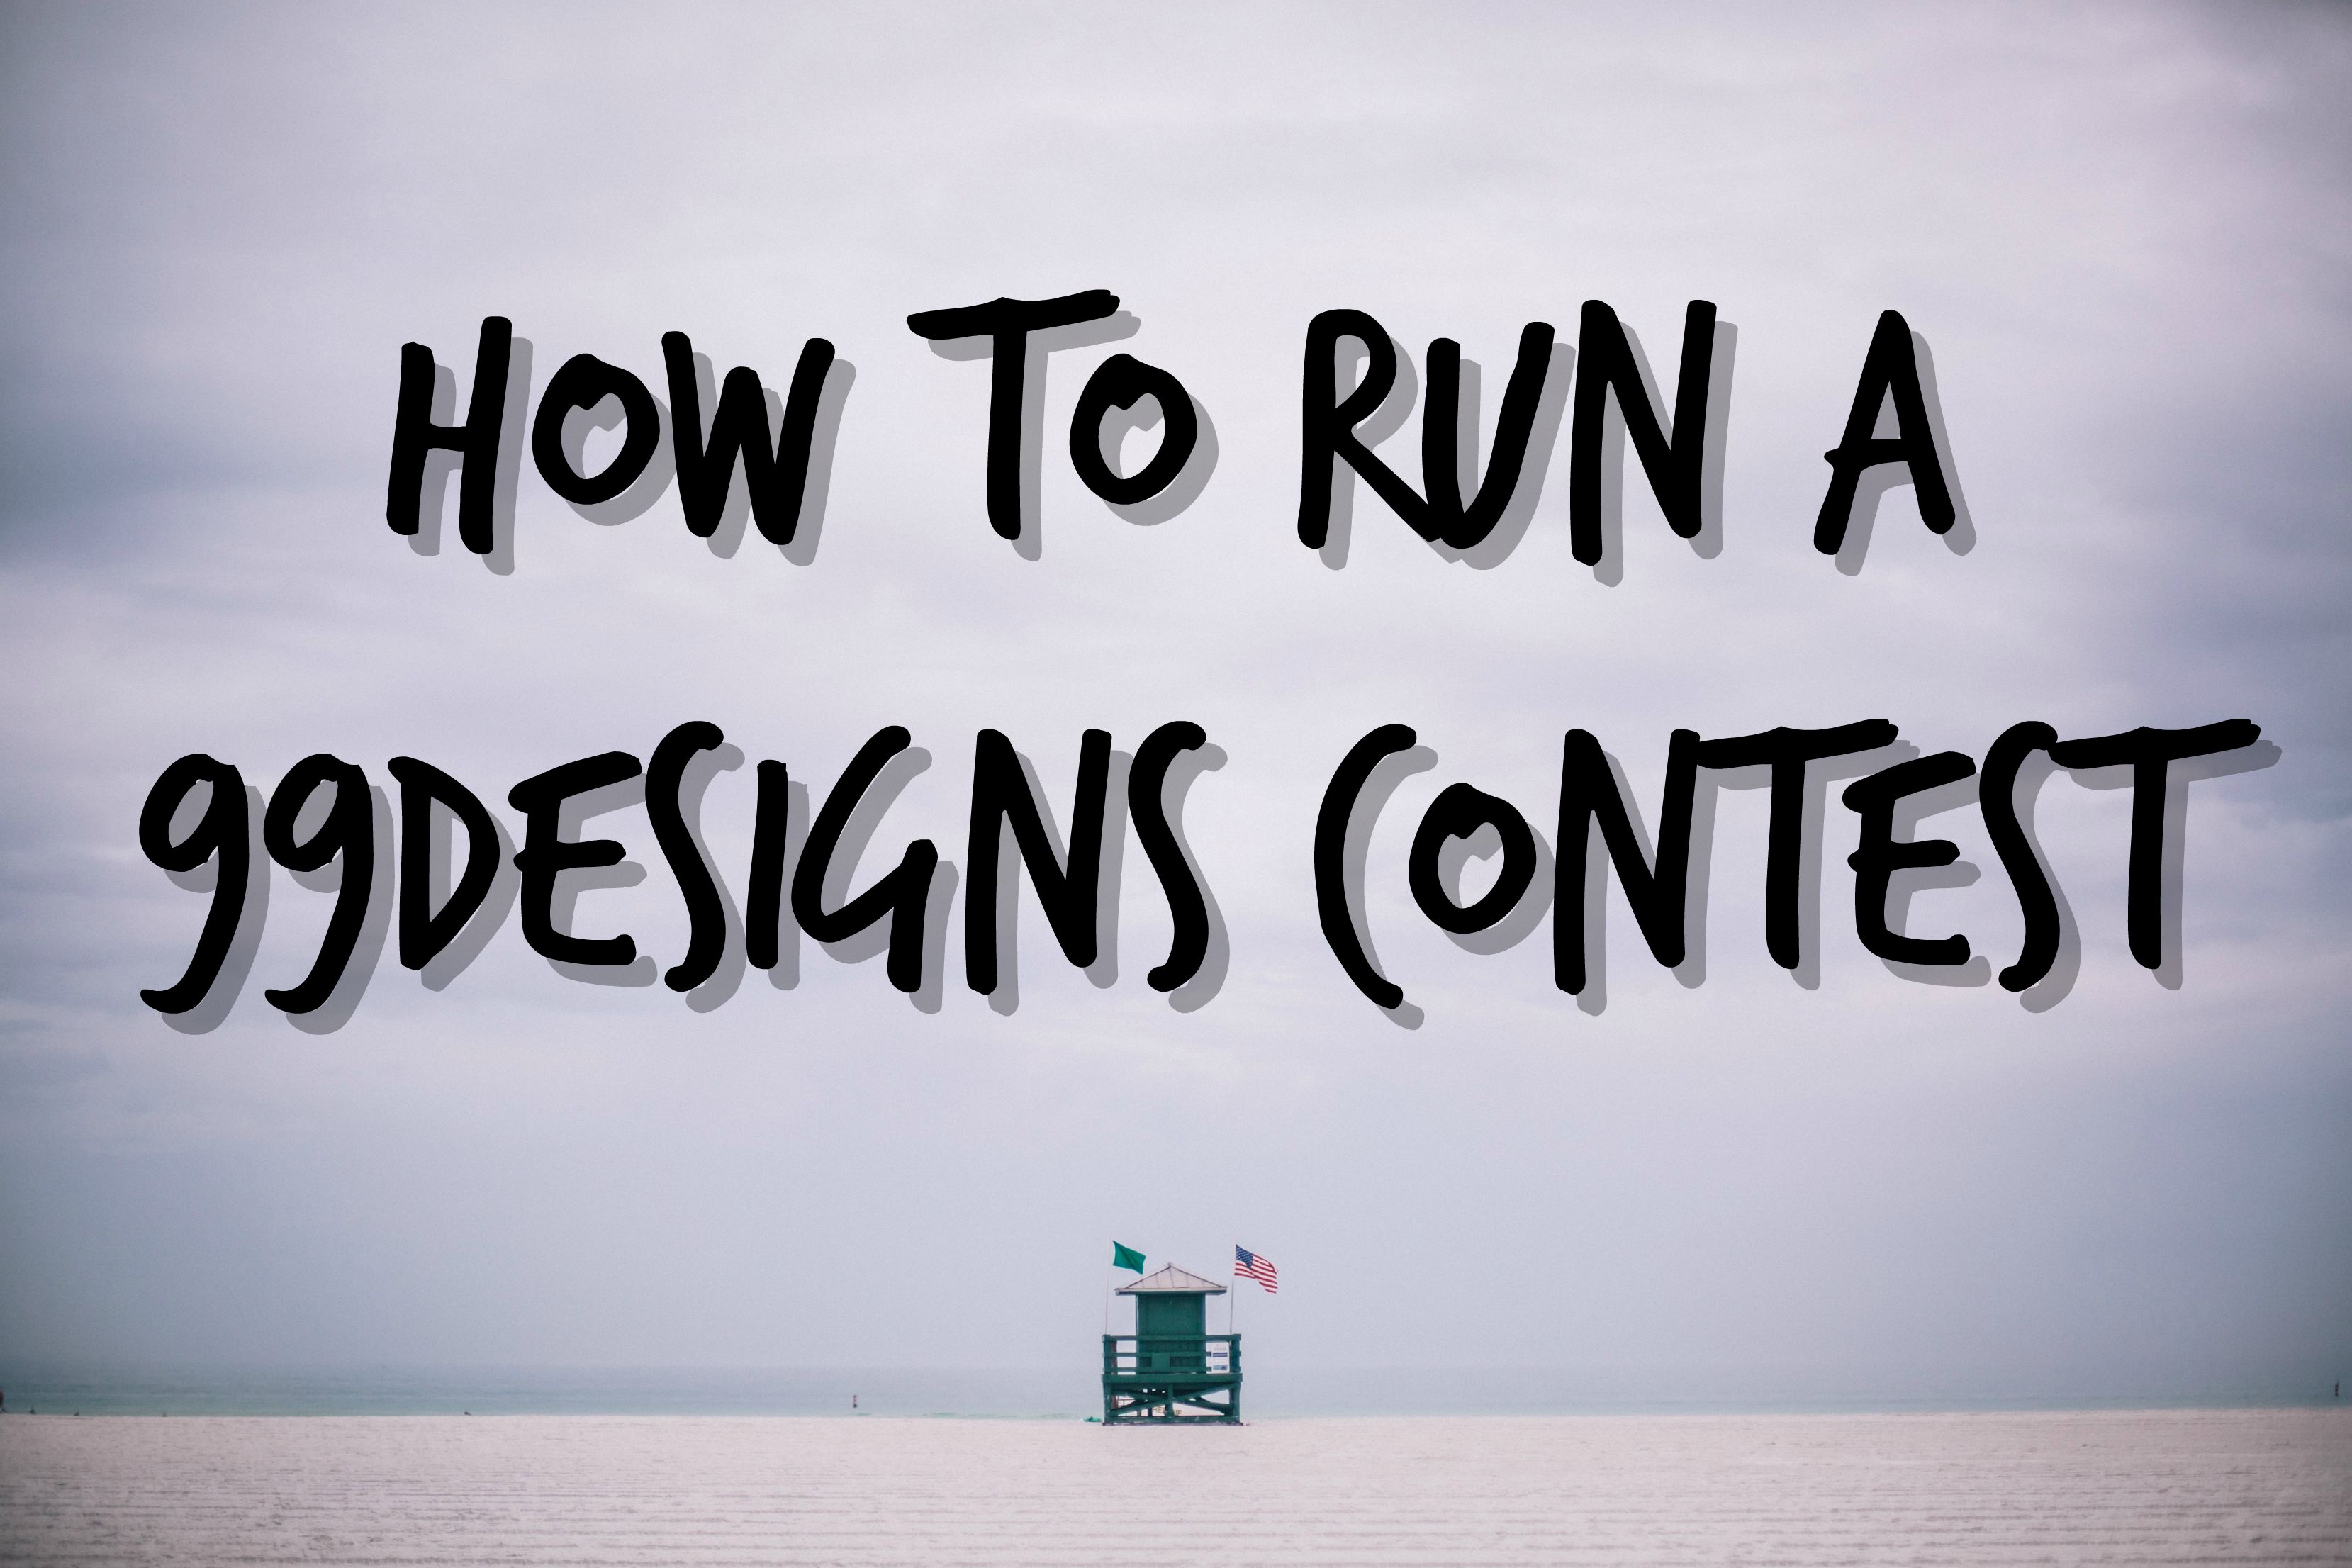 Case Study: How To Run a 99Designs Contest